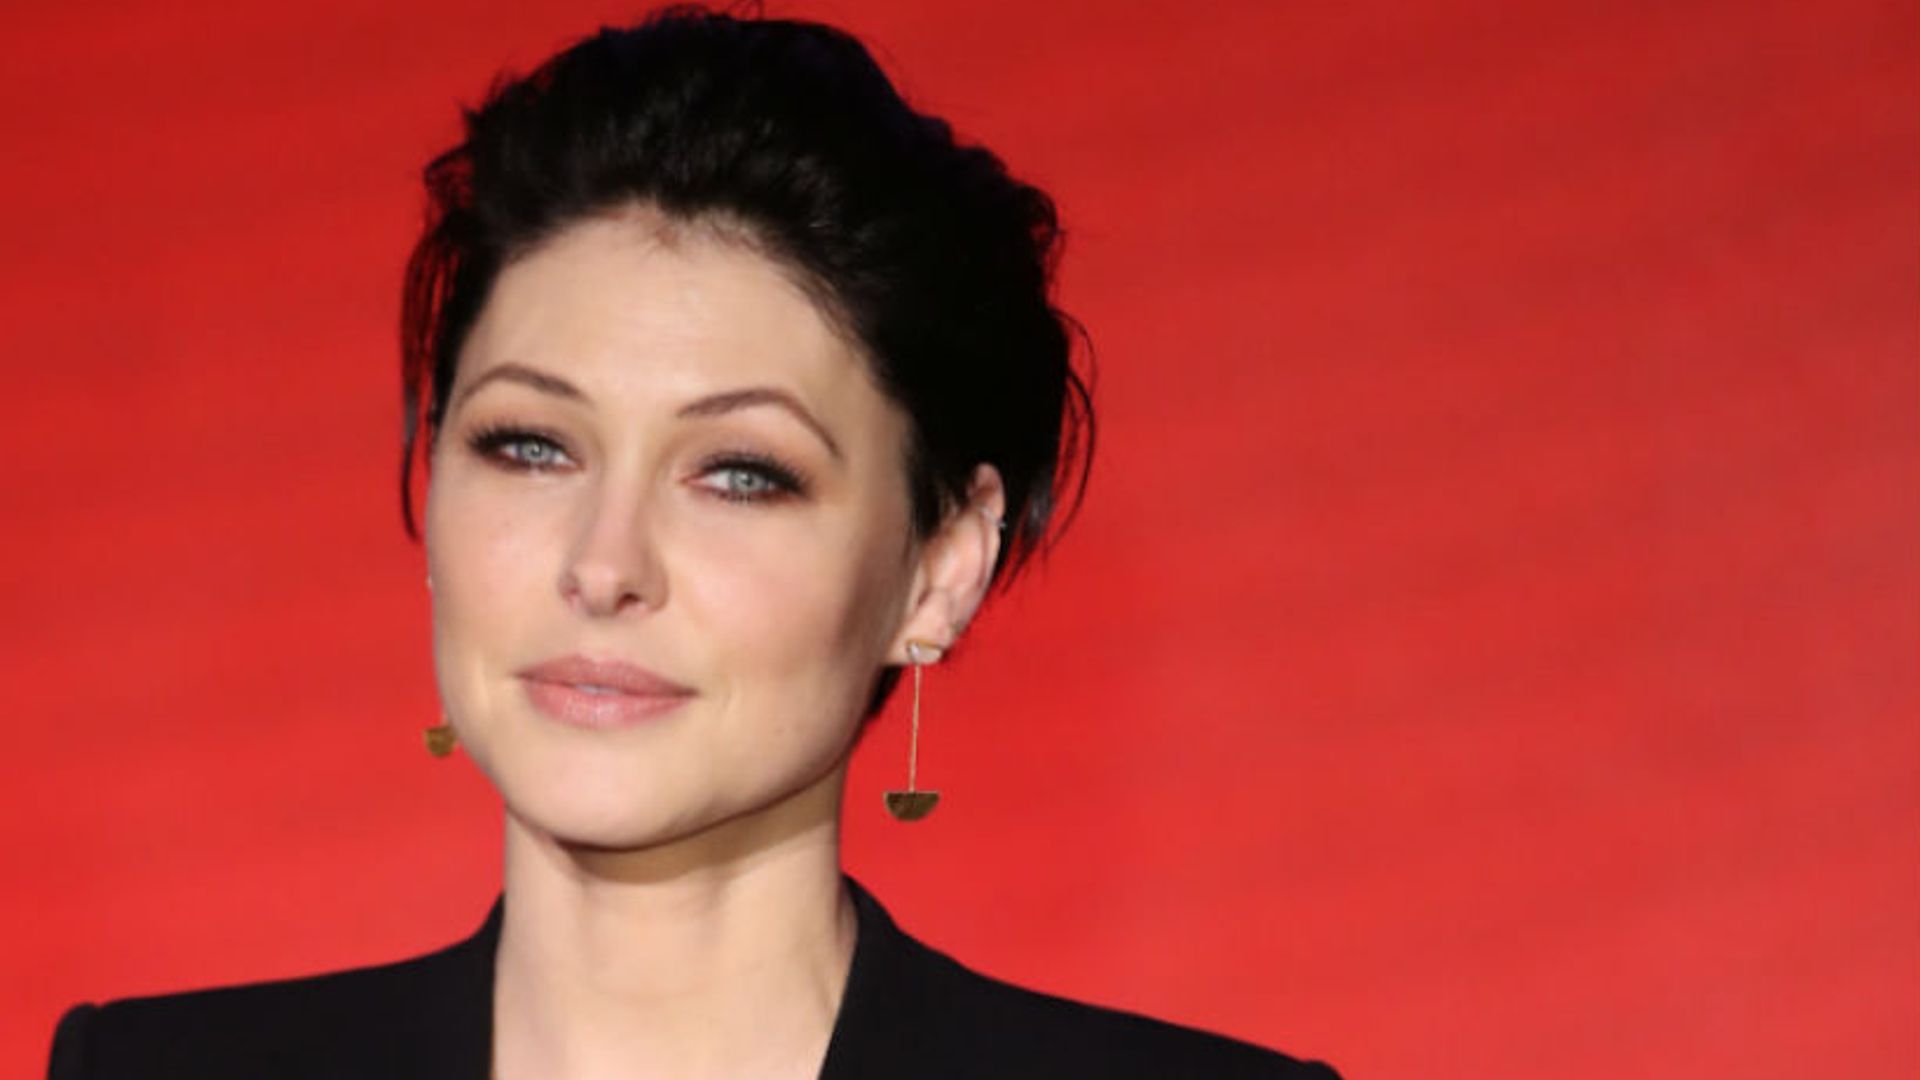 Emma Willis wears Victoria Beckham to The Voice UK auditions